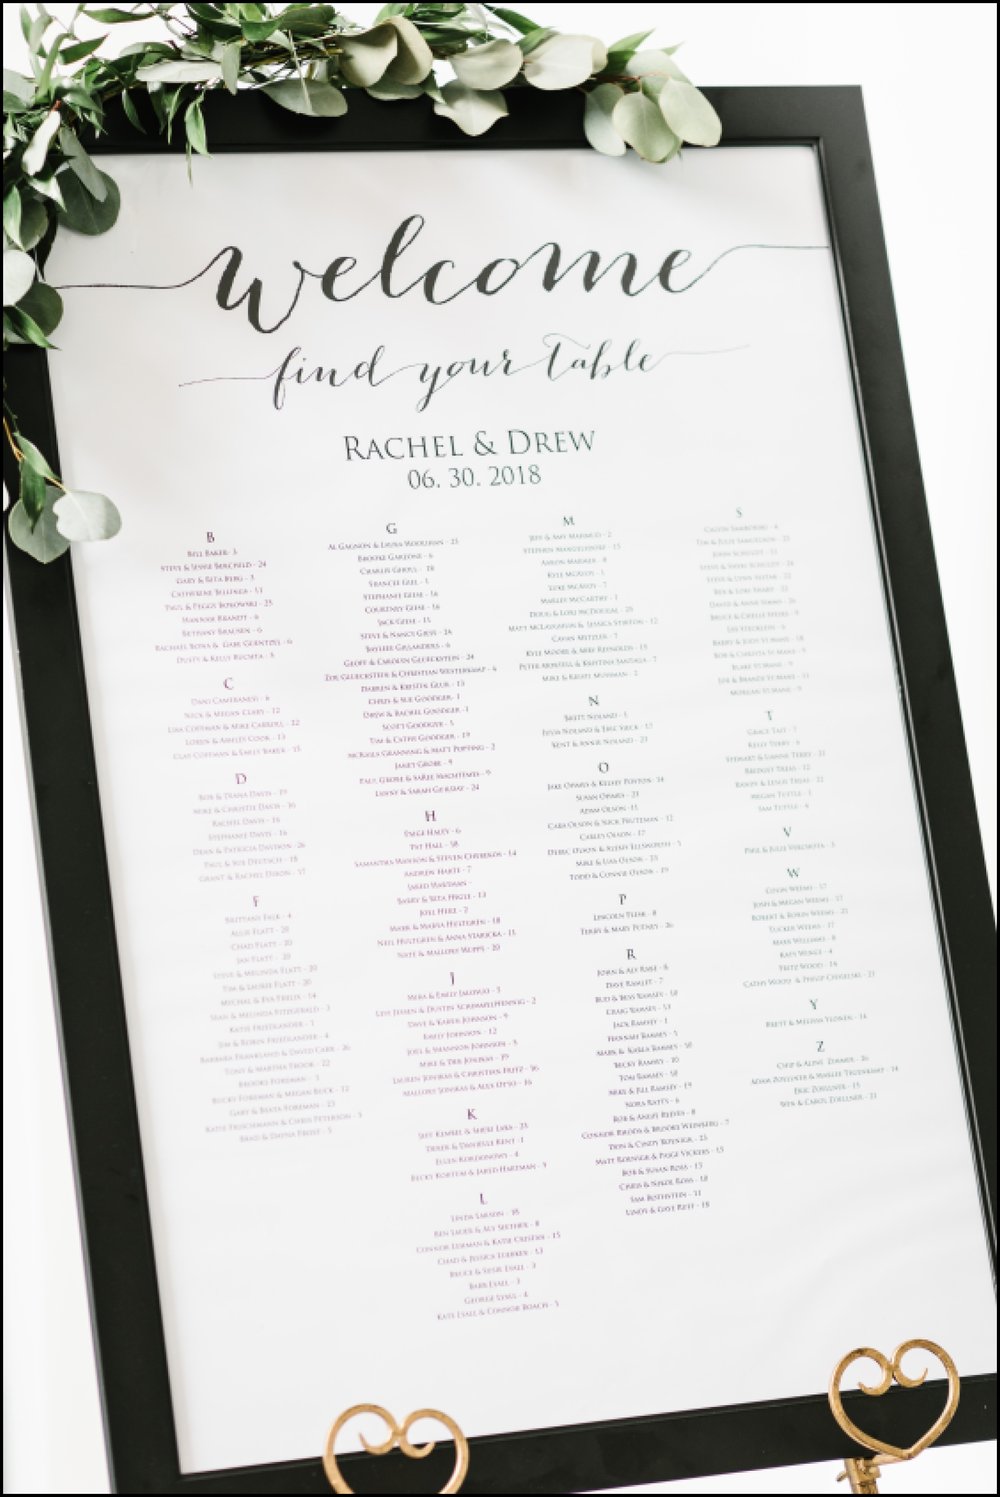 Hutton House wedding reception seating chart